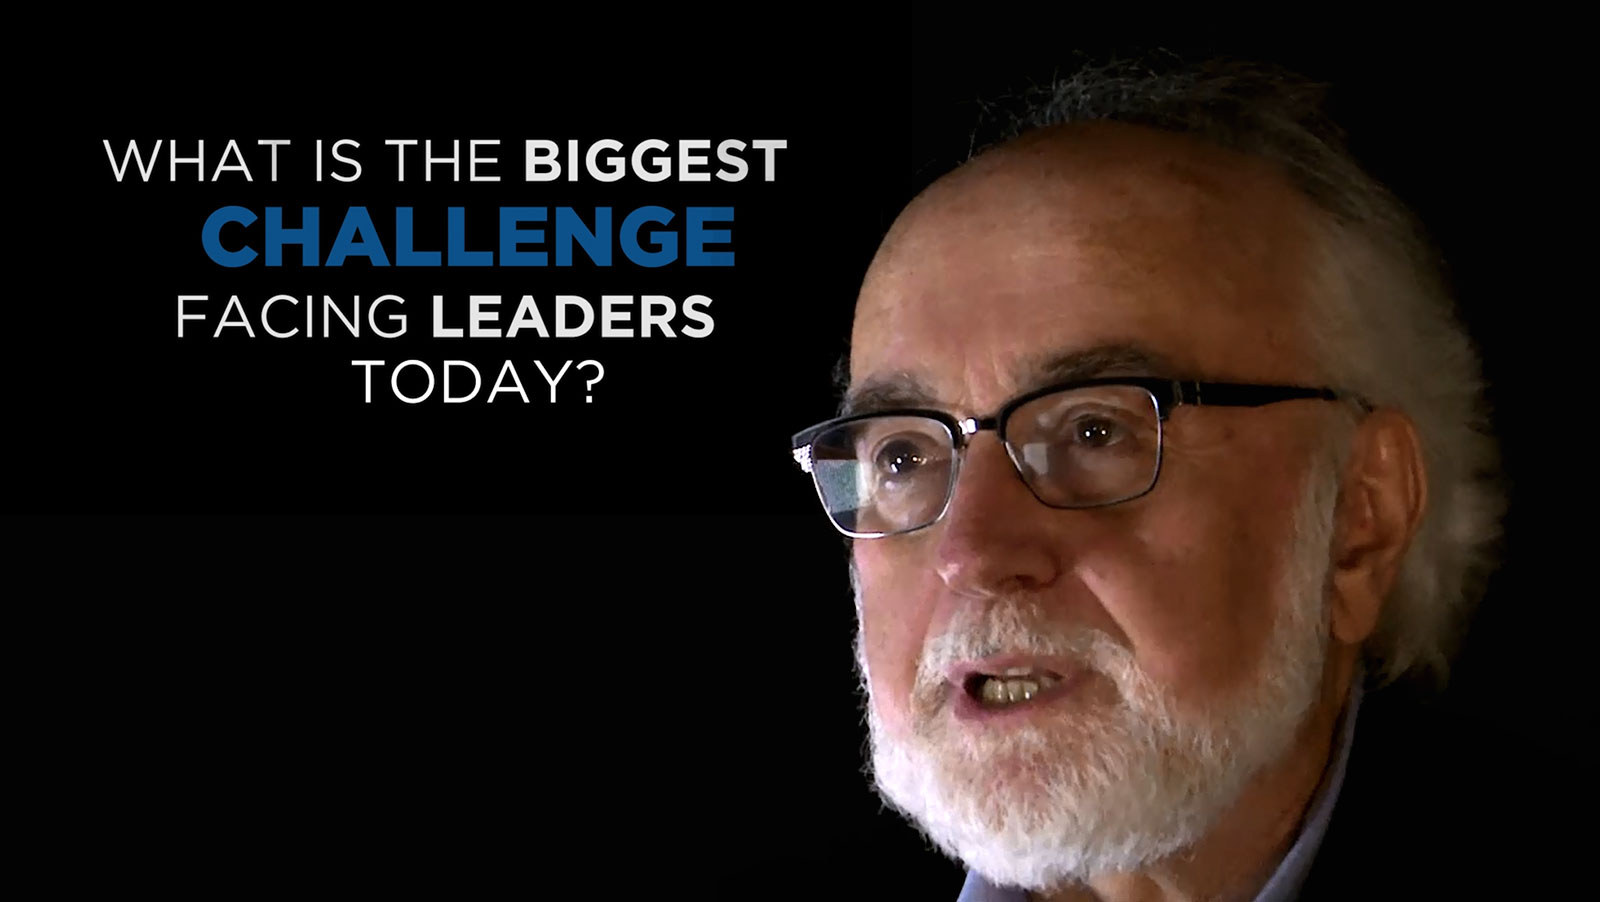 Dr. Sam Liggero- Shared Experience - What is the biggest challenge facing leaders today?